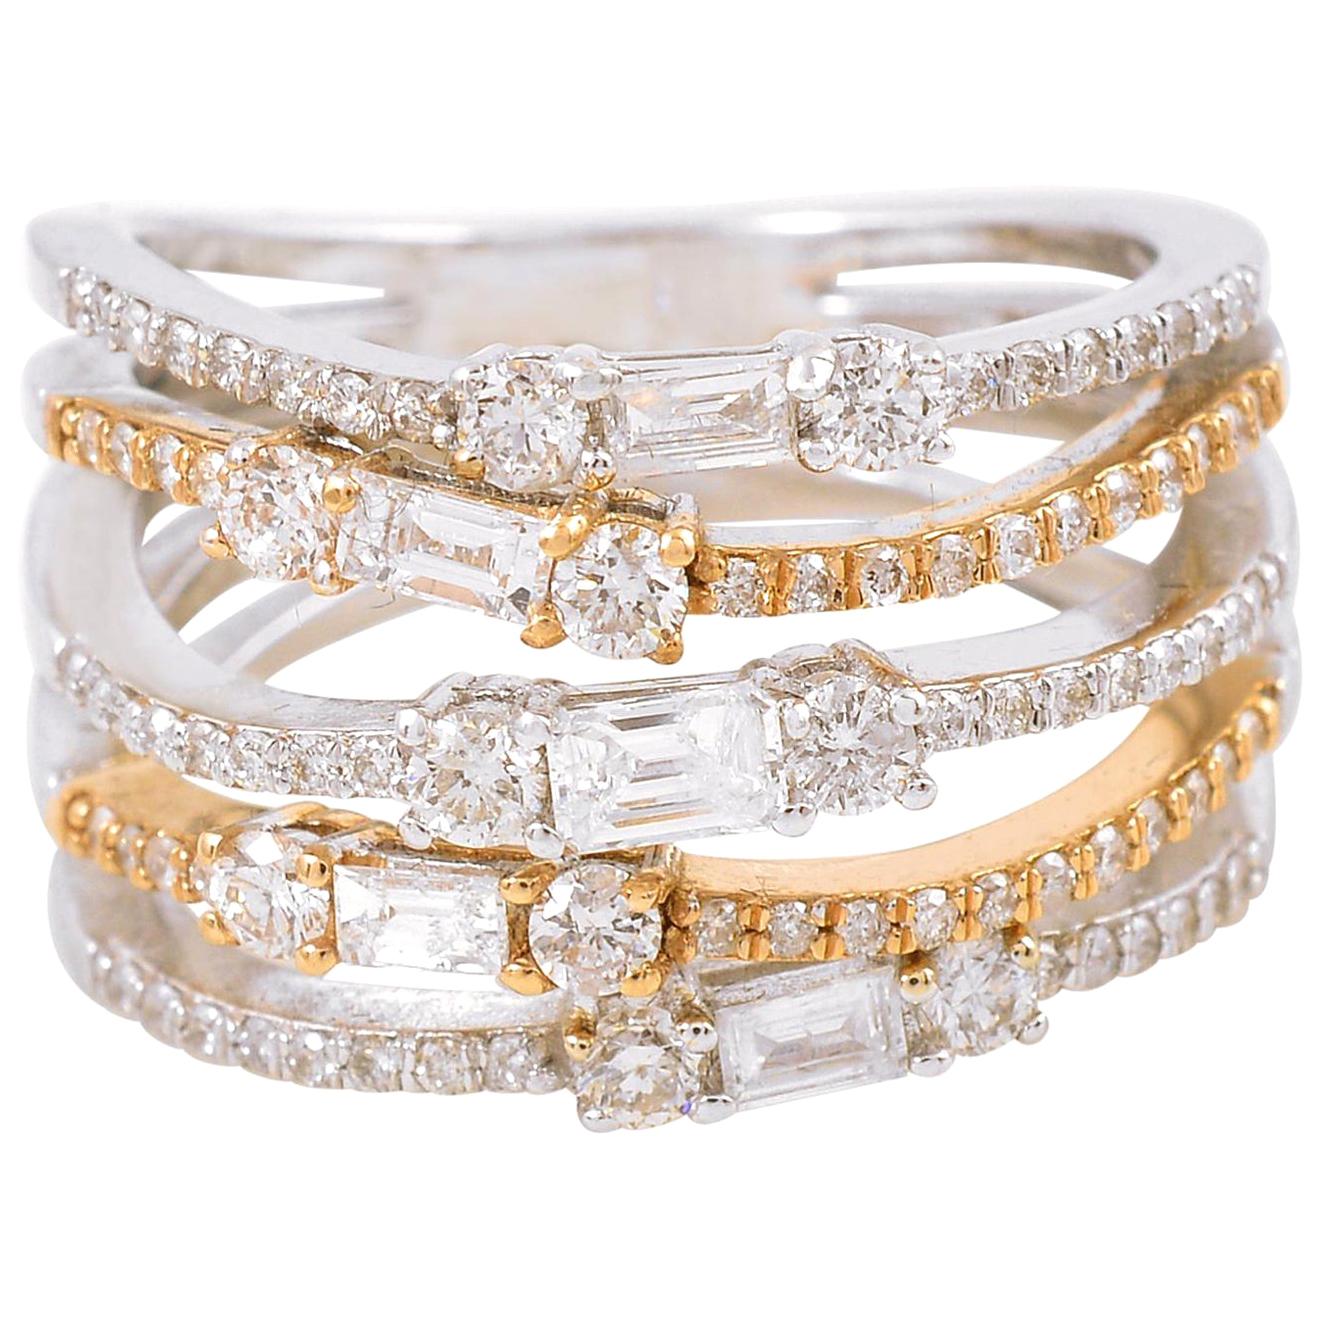 What is a two tone diamond ring?